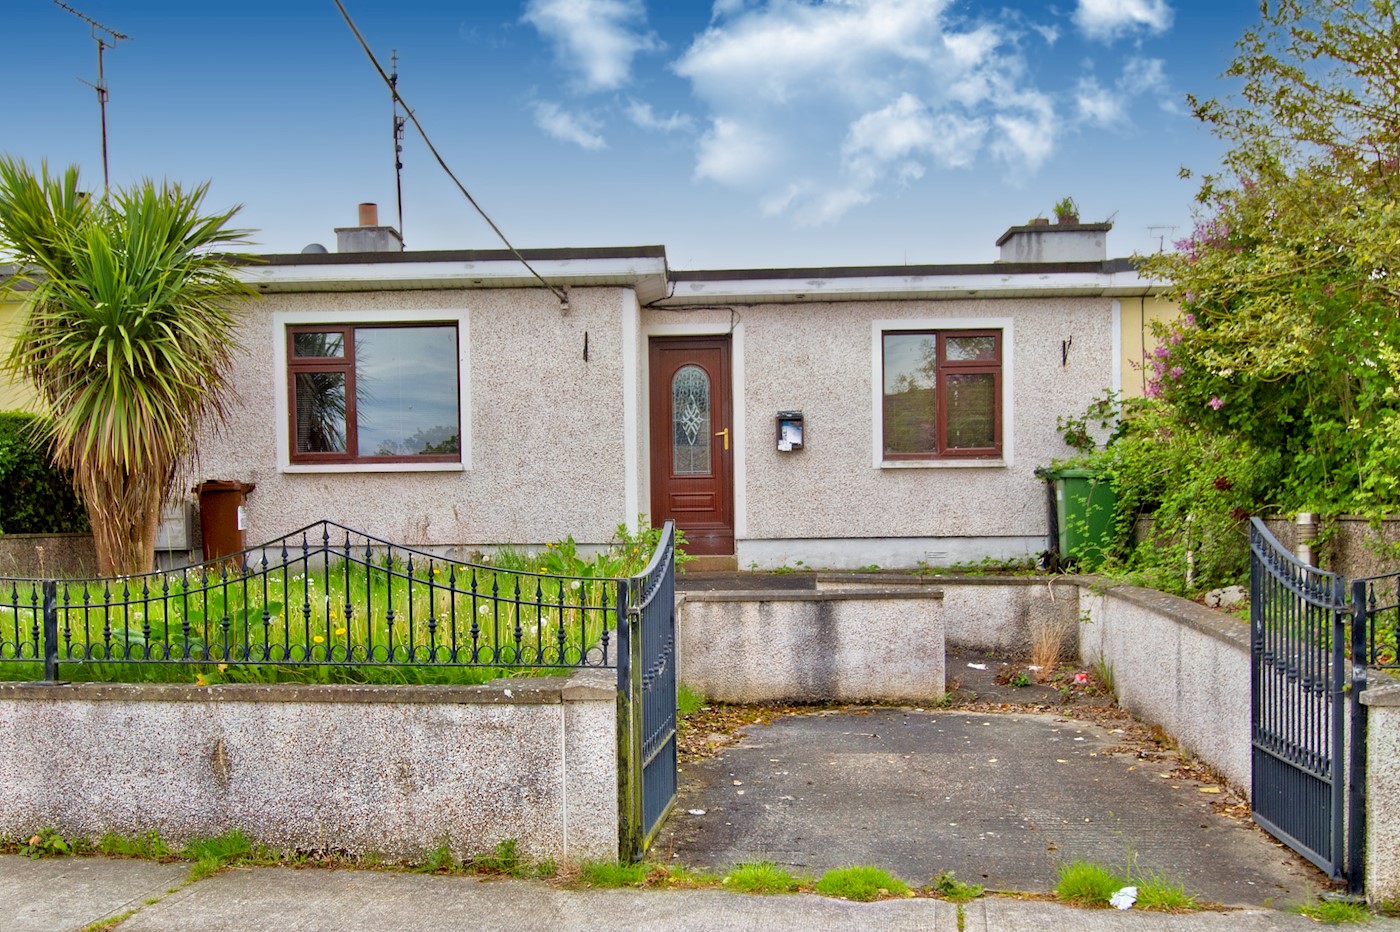 13 Greenbatter, Drogheda, Co. Louth, A92 E3YD 1/13